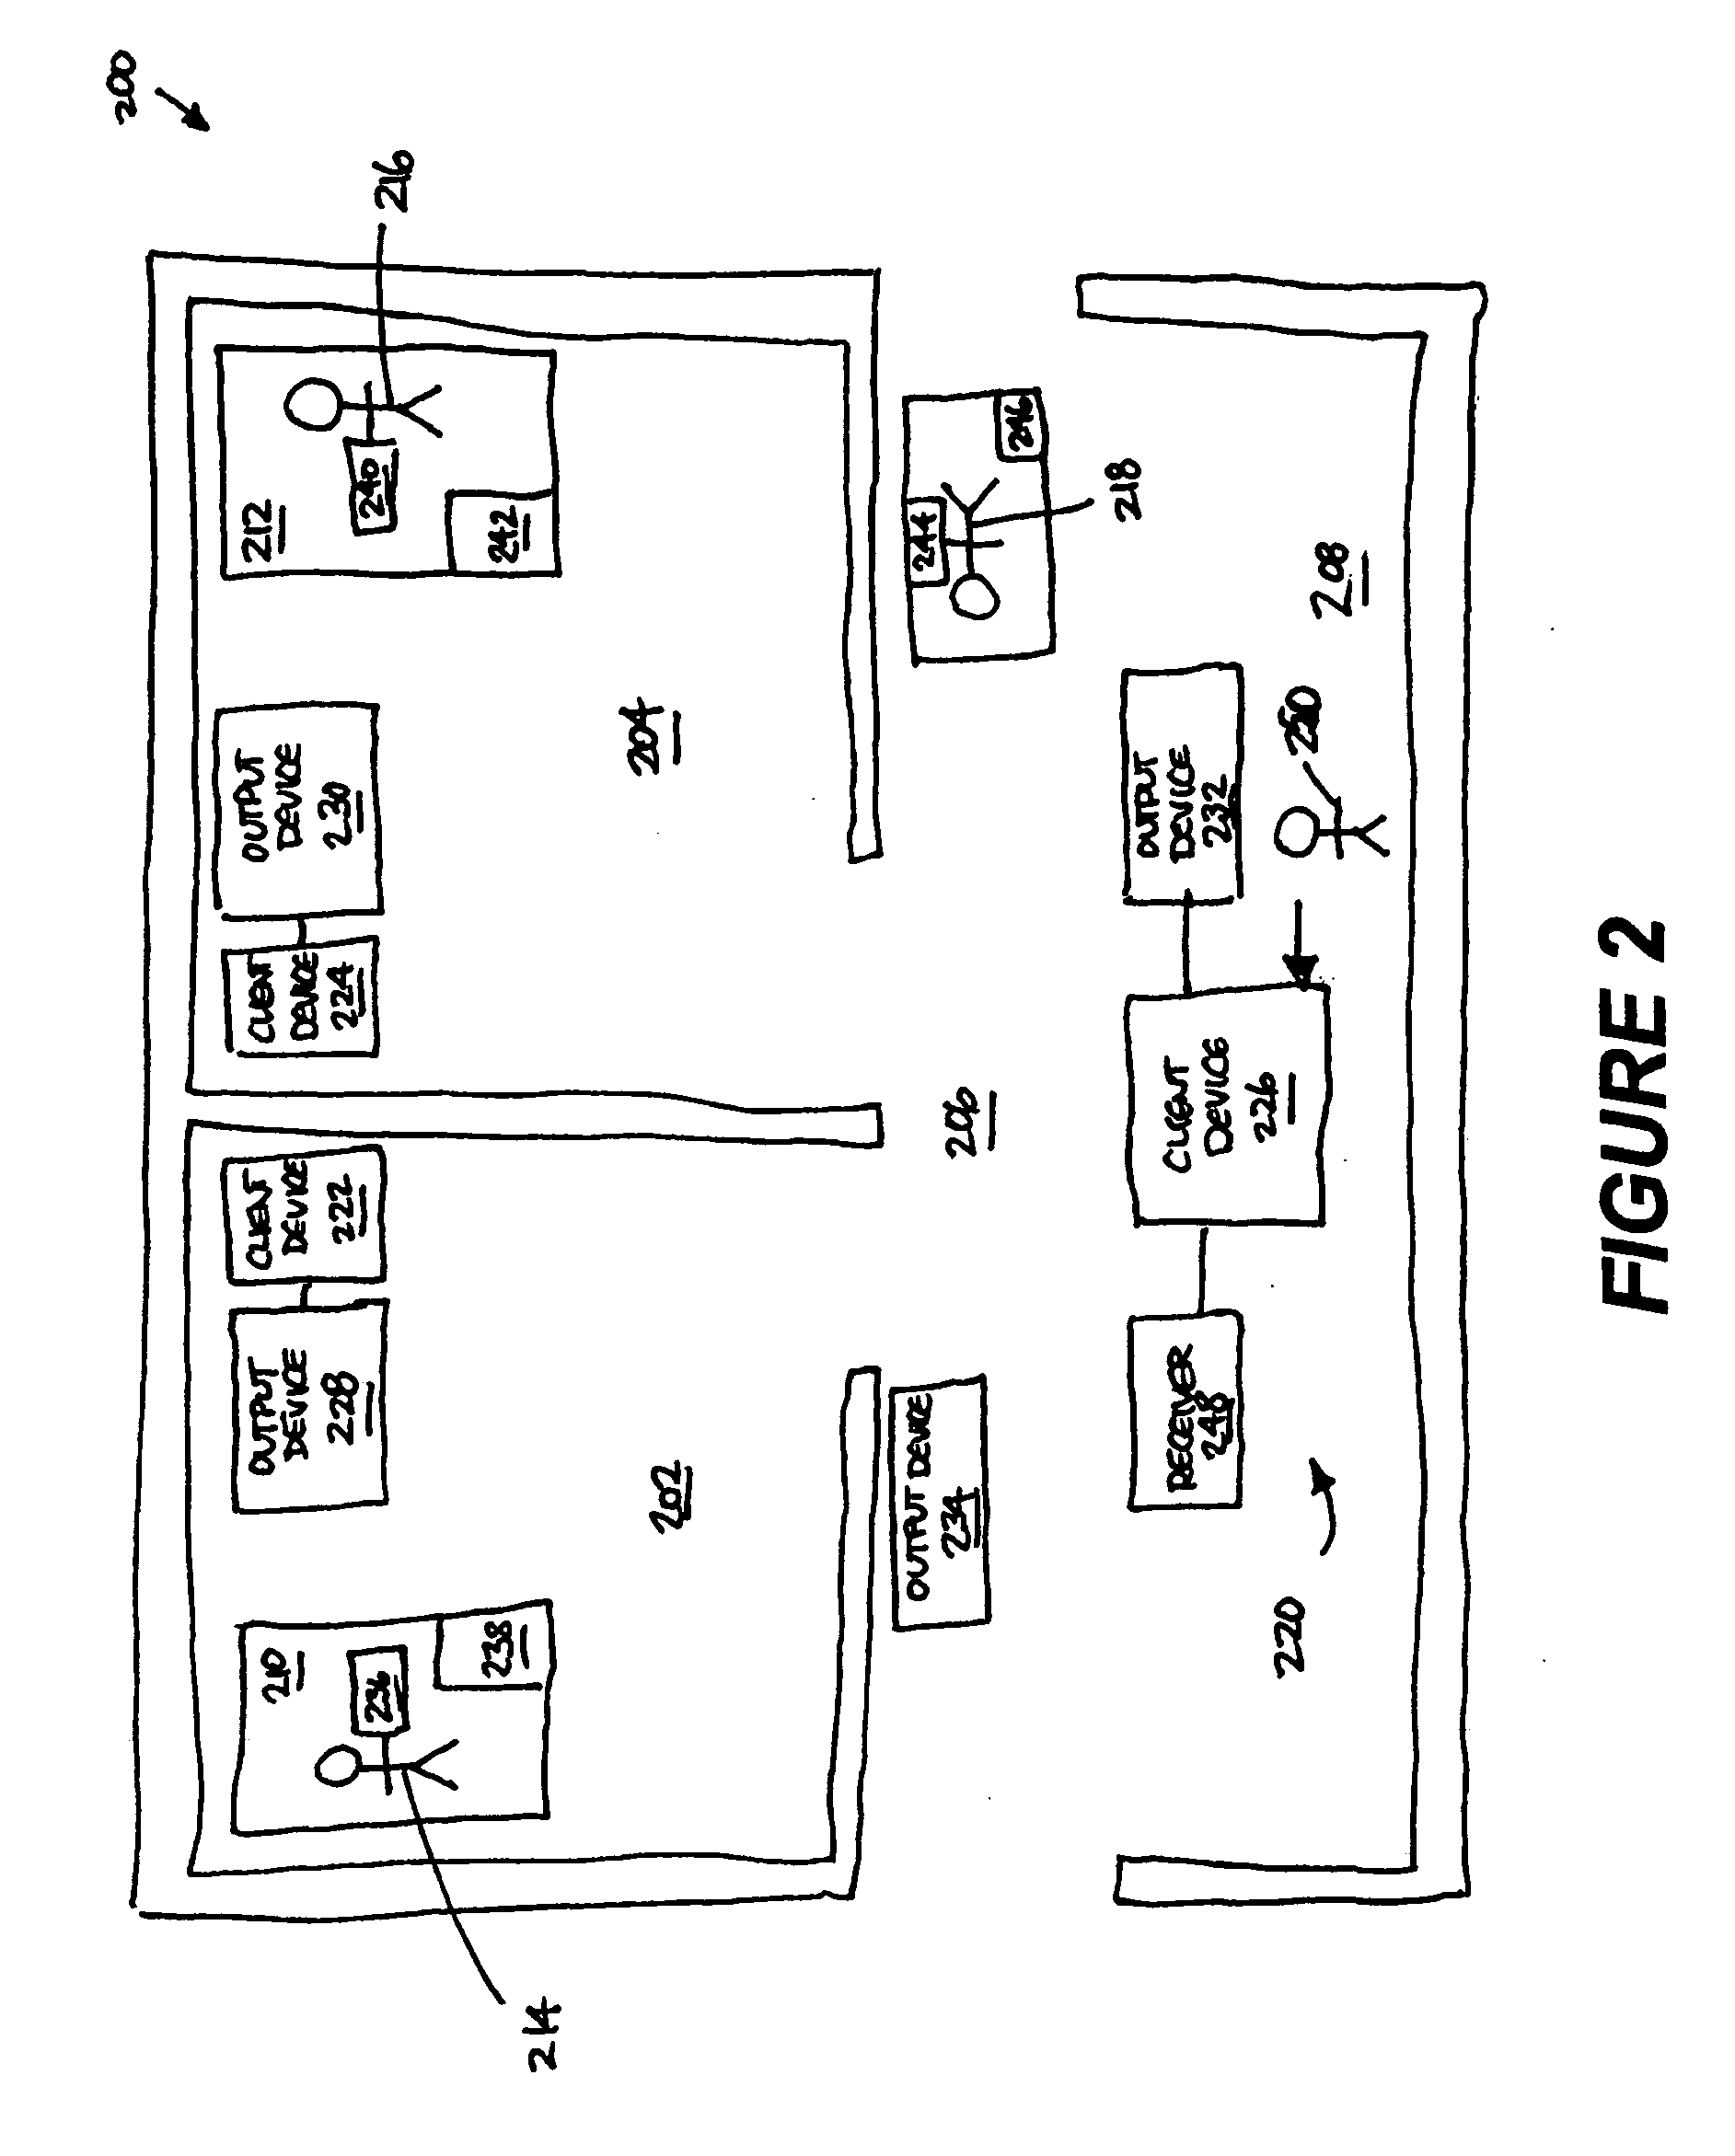 Methods, systems, and apparatus for providing real time query support and graphical views of patient care information